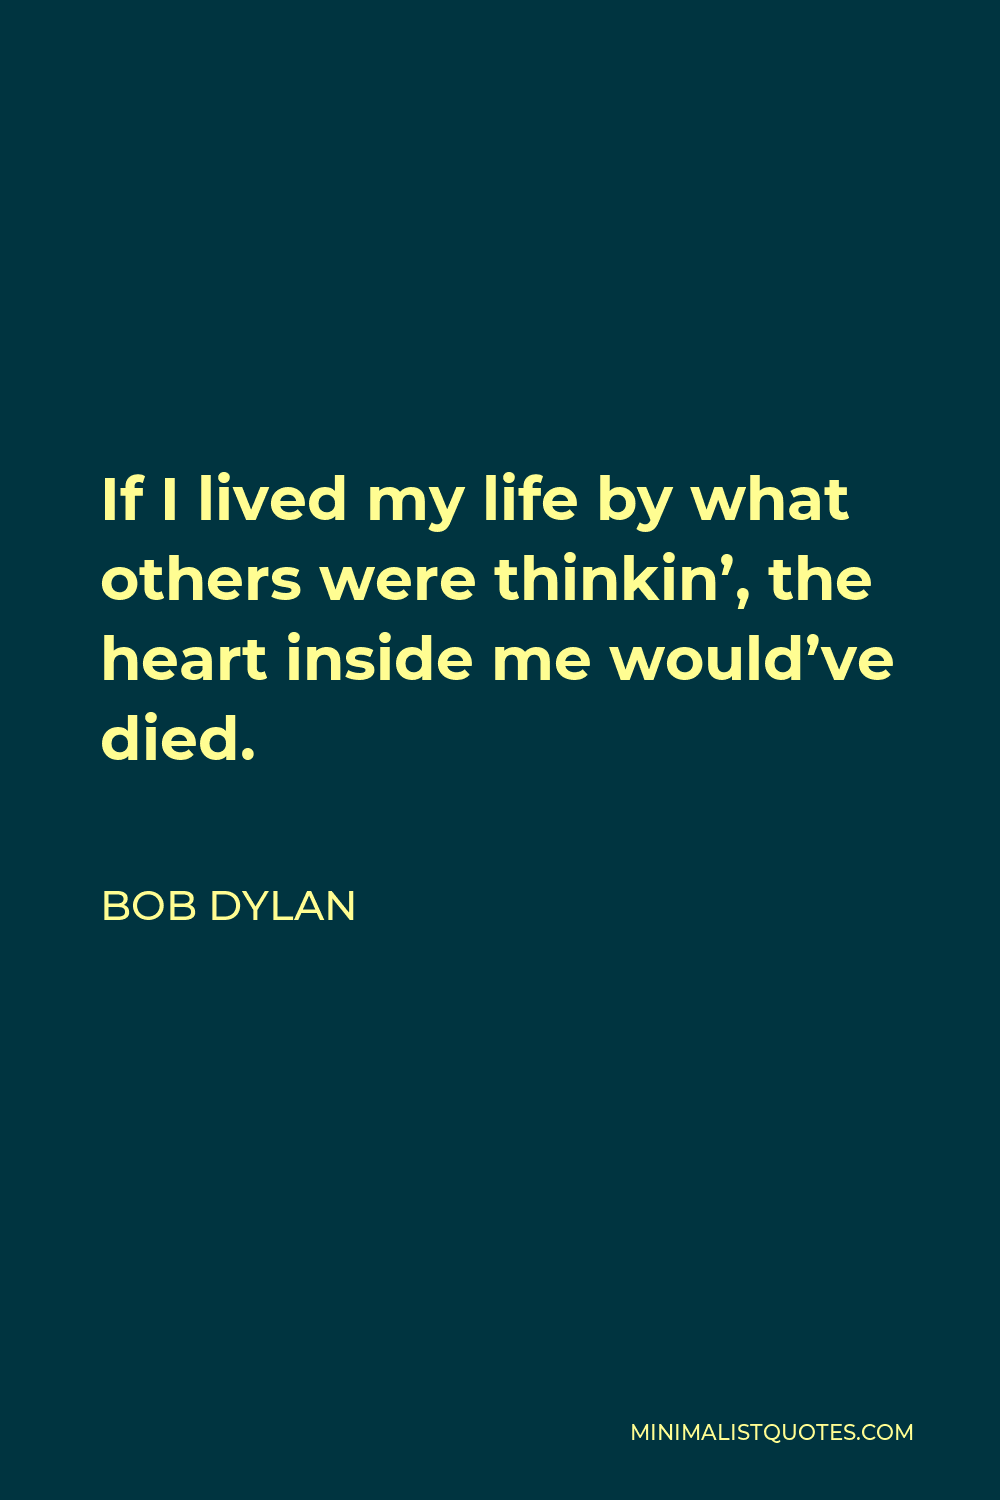 Bob Dylan Quote - If I lived my life by what others were thinkin’, the heart inside me would’ve died.